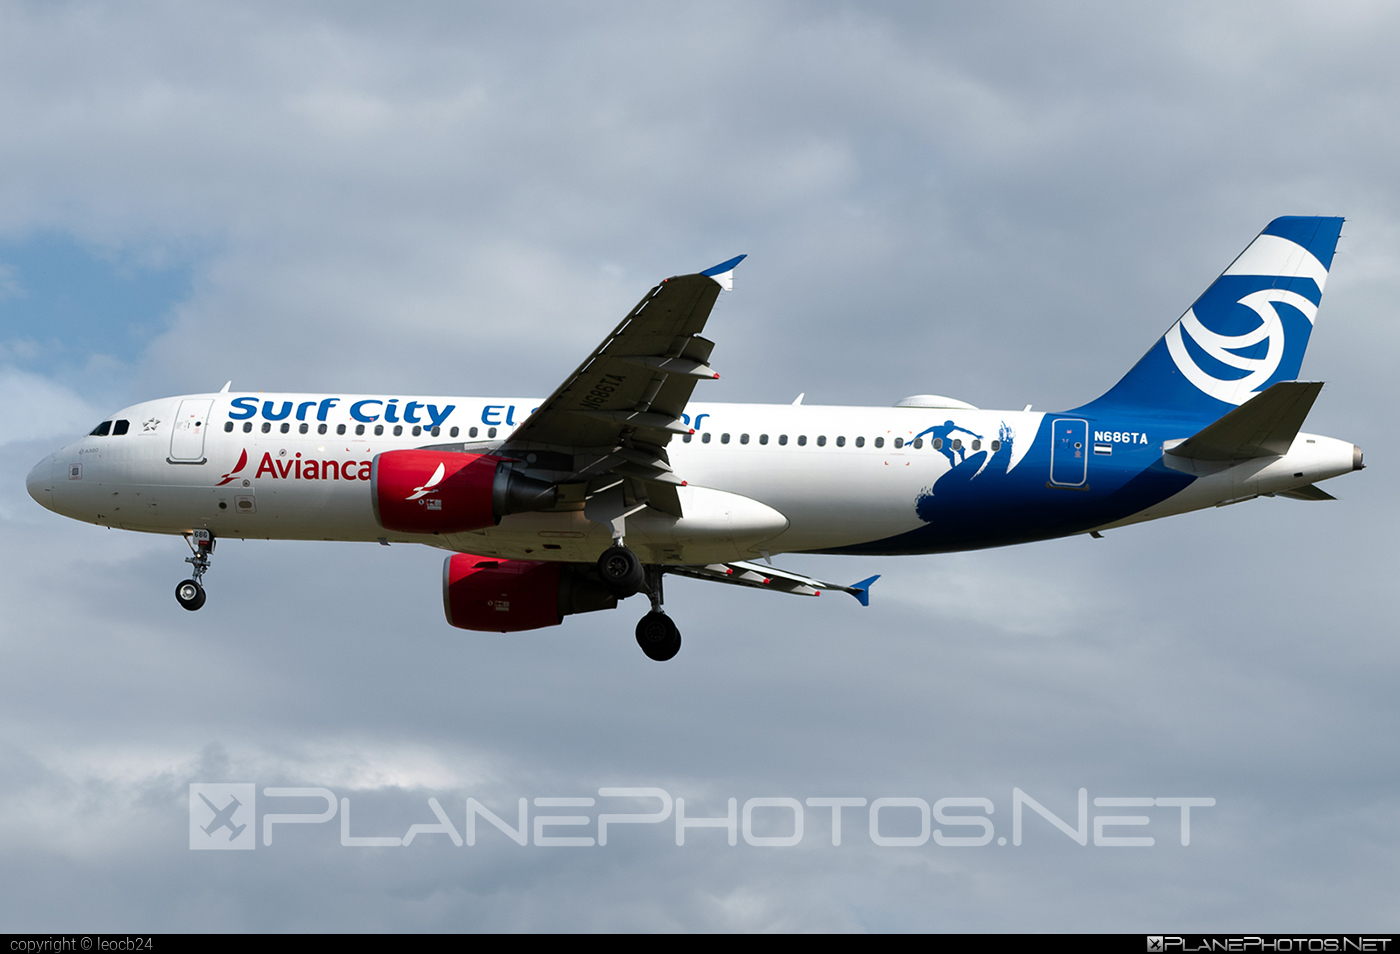 Airbus A320-214 - N686TA operated by Avianca El Salvador #AviancaElSalvador #a320 #a320family #airbus #airbus320 #avianca